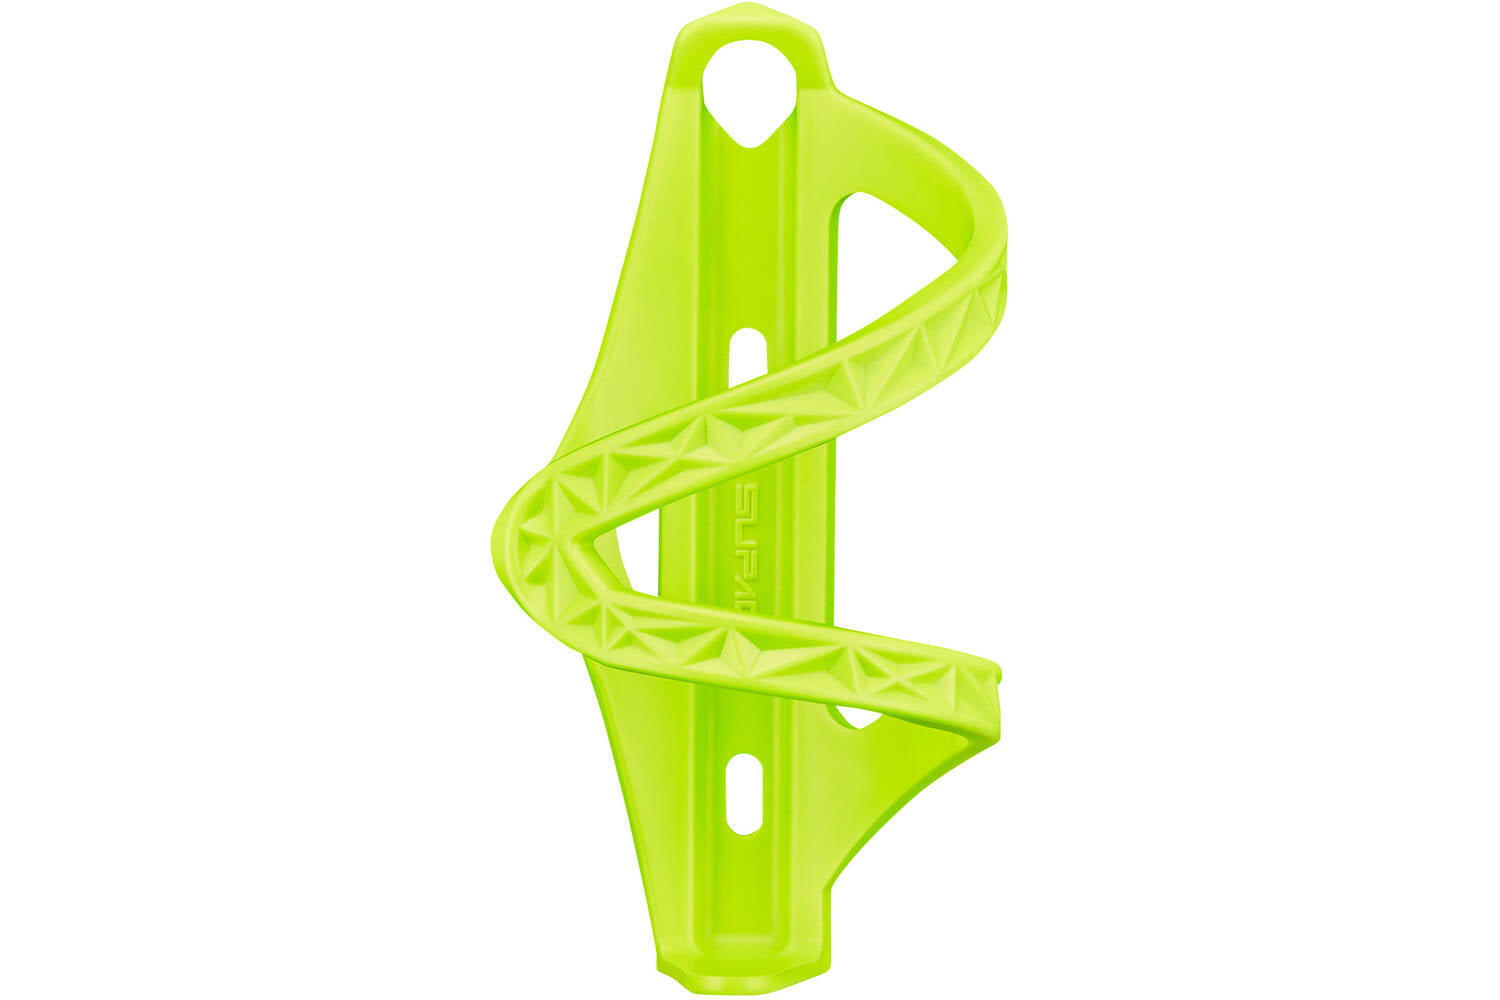 Bottle cage side swipe cage neon yellow left